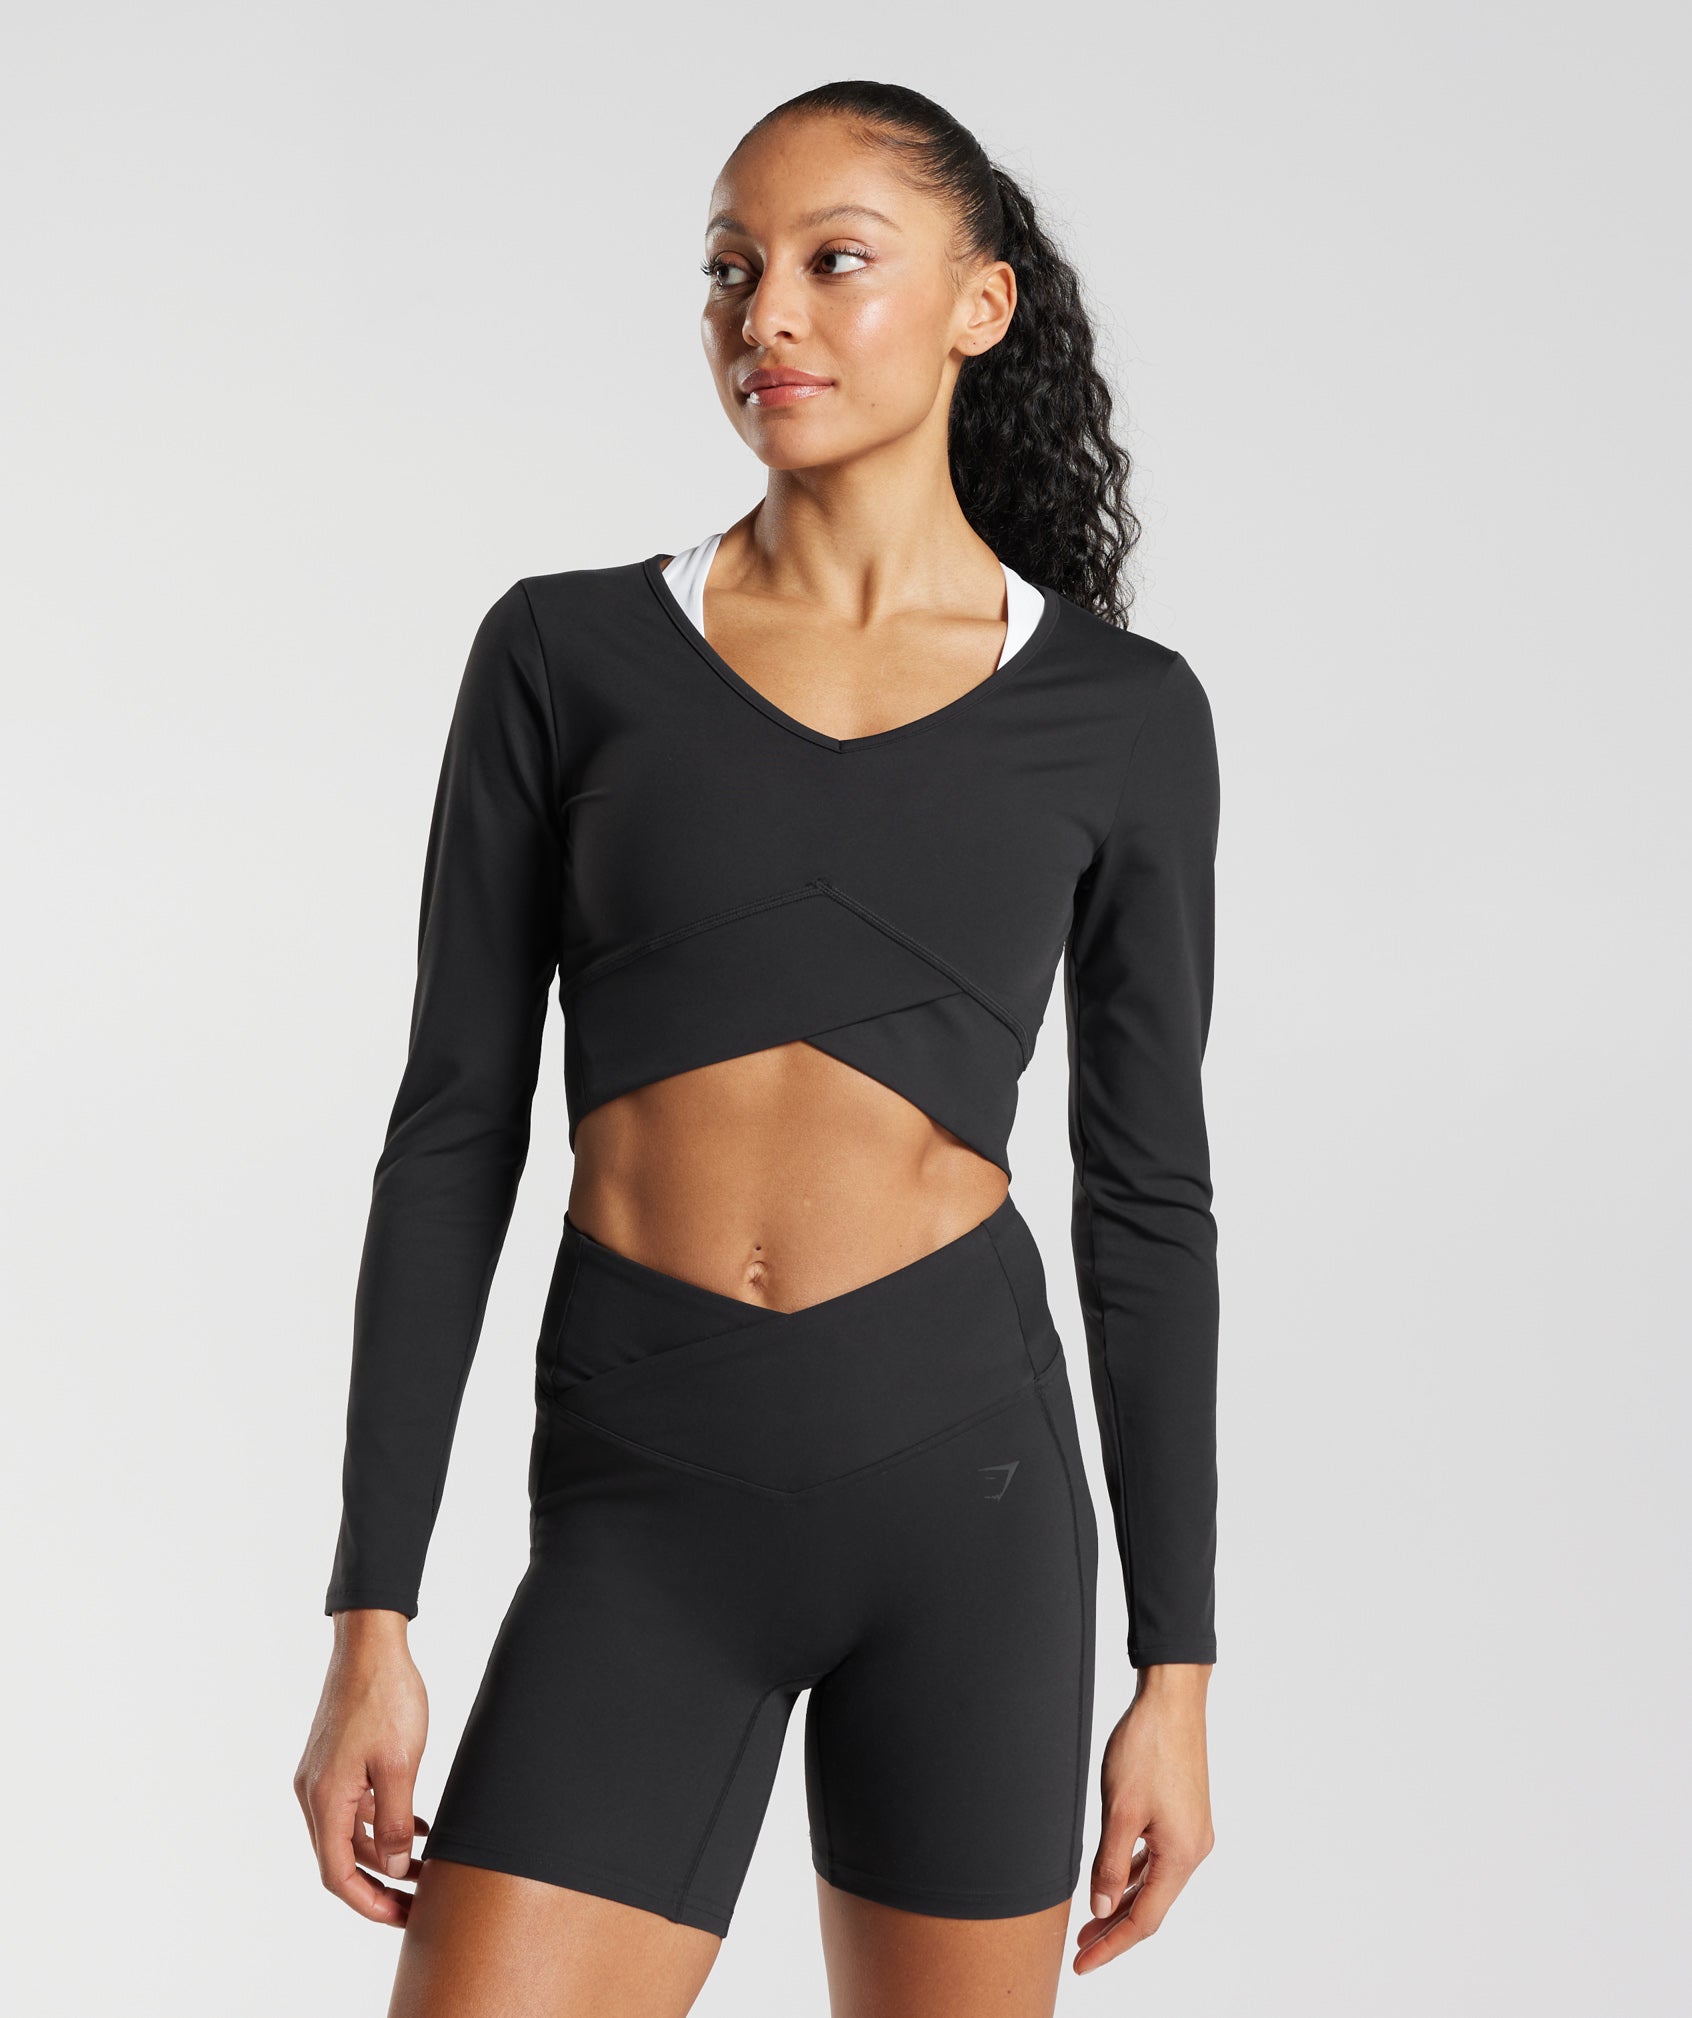 Gymshark Flex Sports Long Sleeve Crop Top - Charcoal Marl/teal from Gymshark  on 21 Buttons